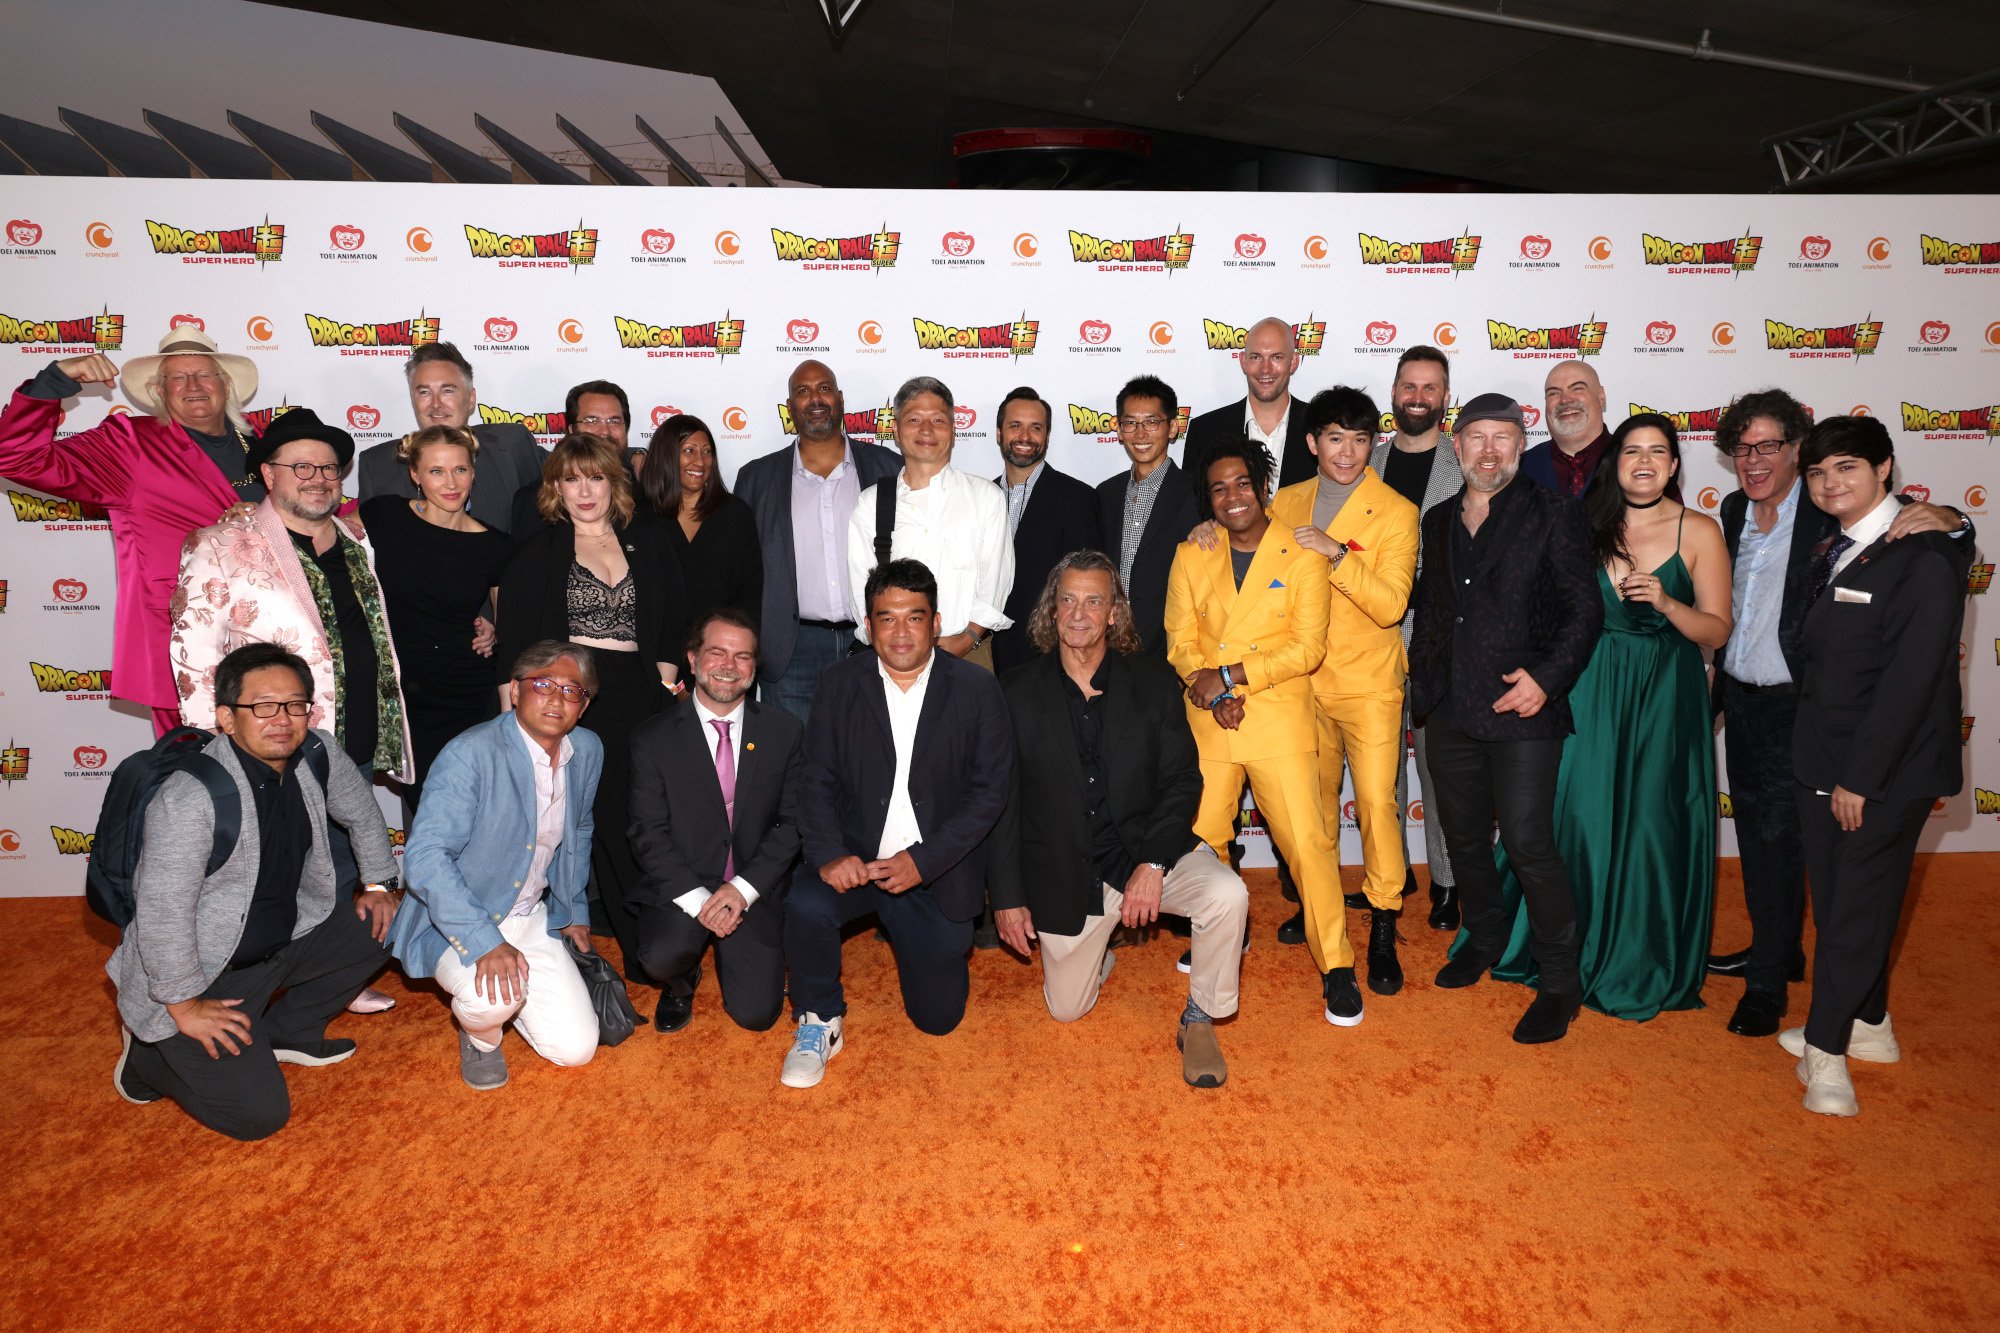 The cast of 'Dragon Ball Super: Super Hero' on the orange carpet for the film. They're all standing together in front of a wall with the movie's logo on it.